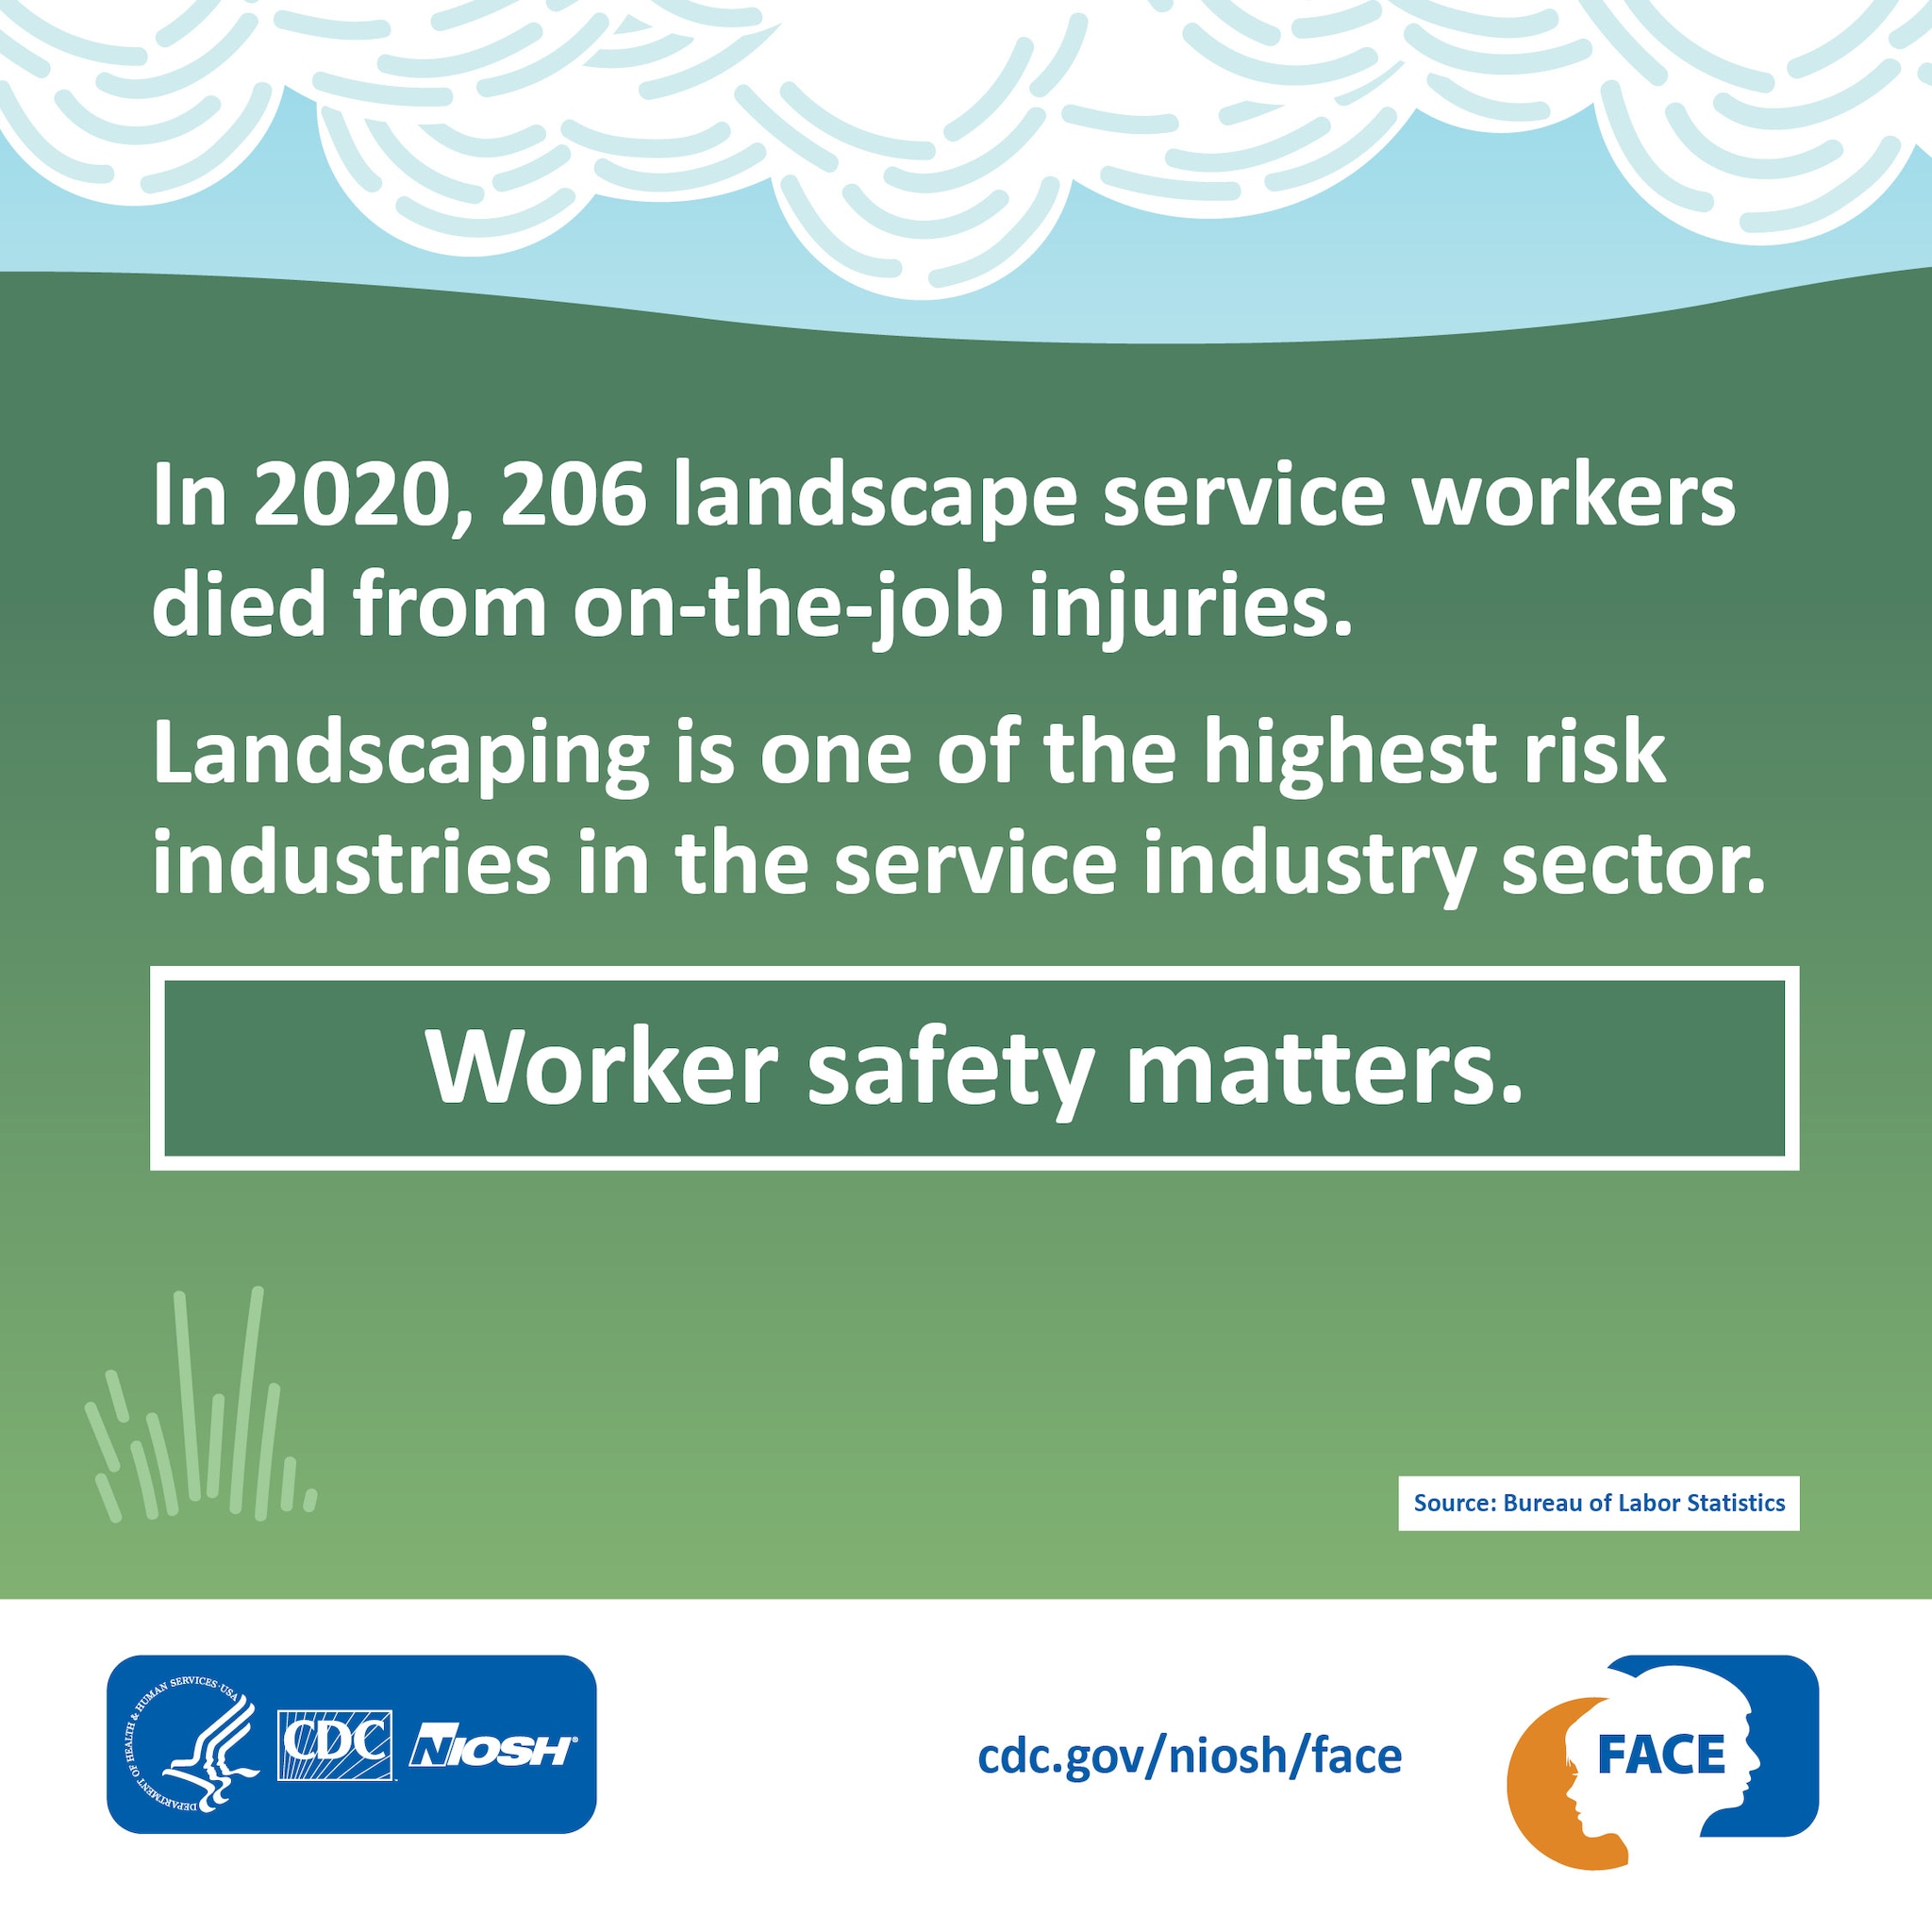 In 2020, 206 landscape service workers died from on-the-job injuries. Landscaping is one of the highest risk industries in the service industry sector. Worker Safety Matters.